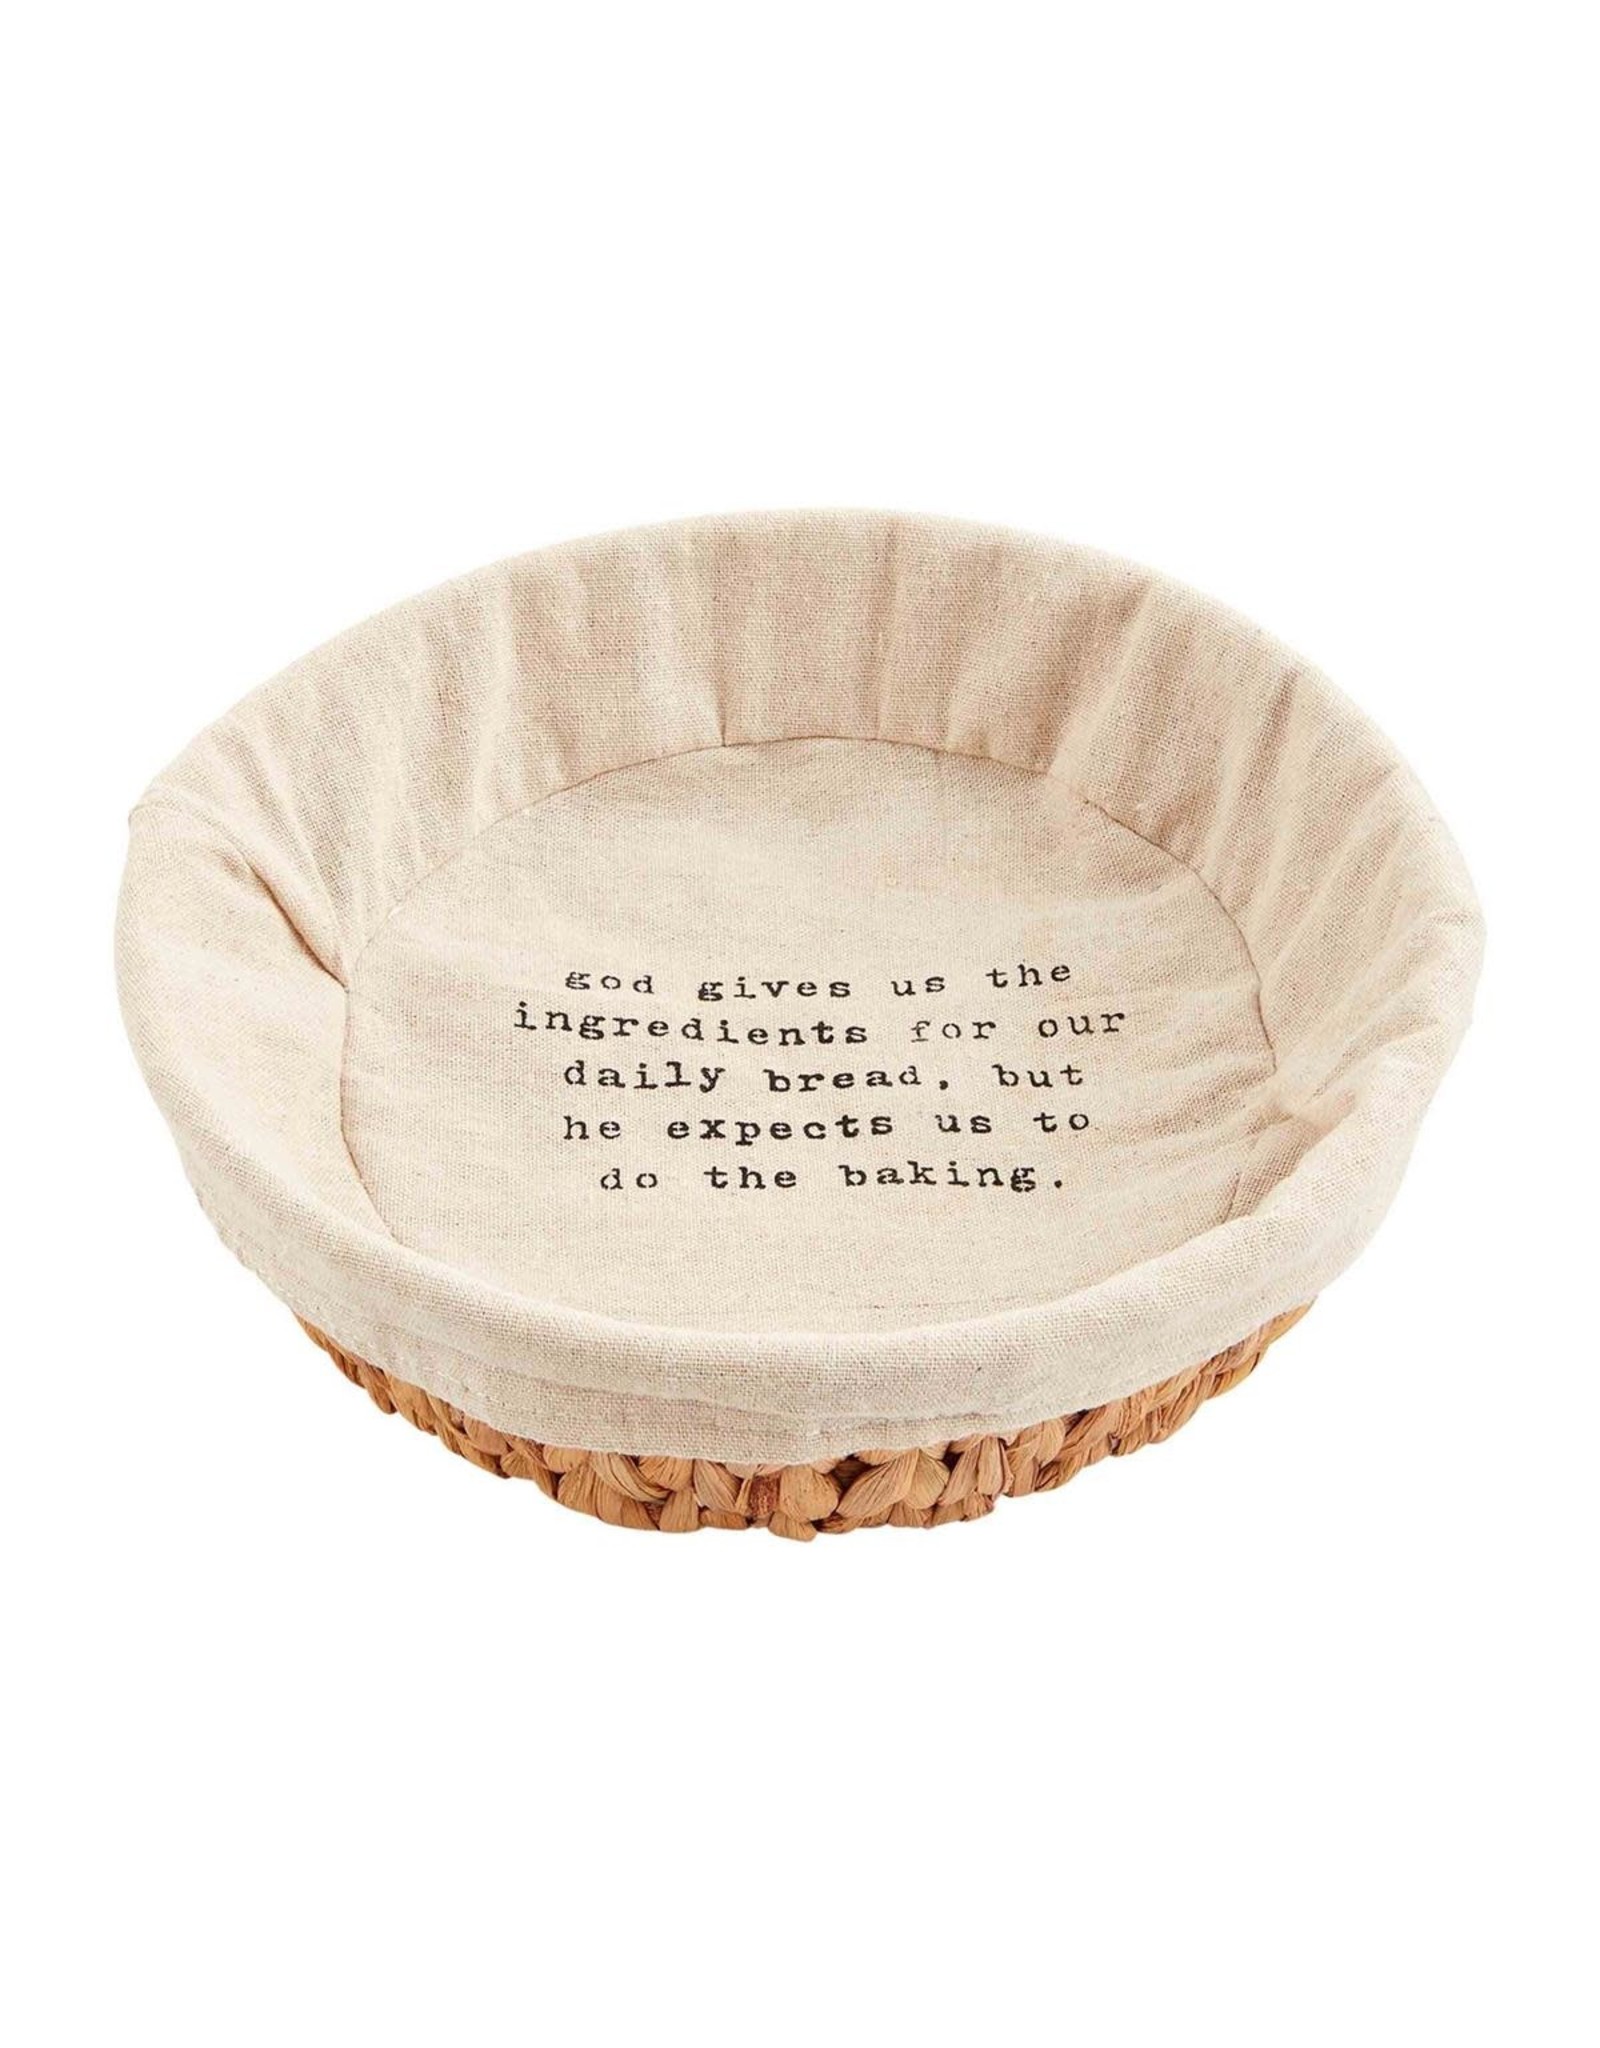 Mud Pie Bread Basket W Sentiment God Gives Us The Ingredients